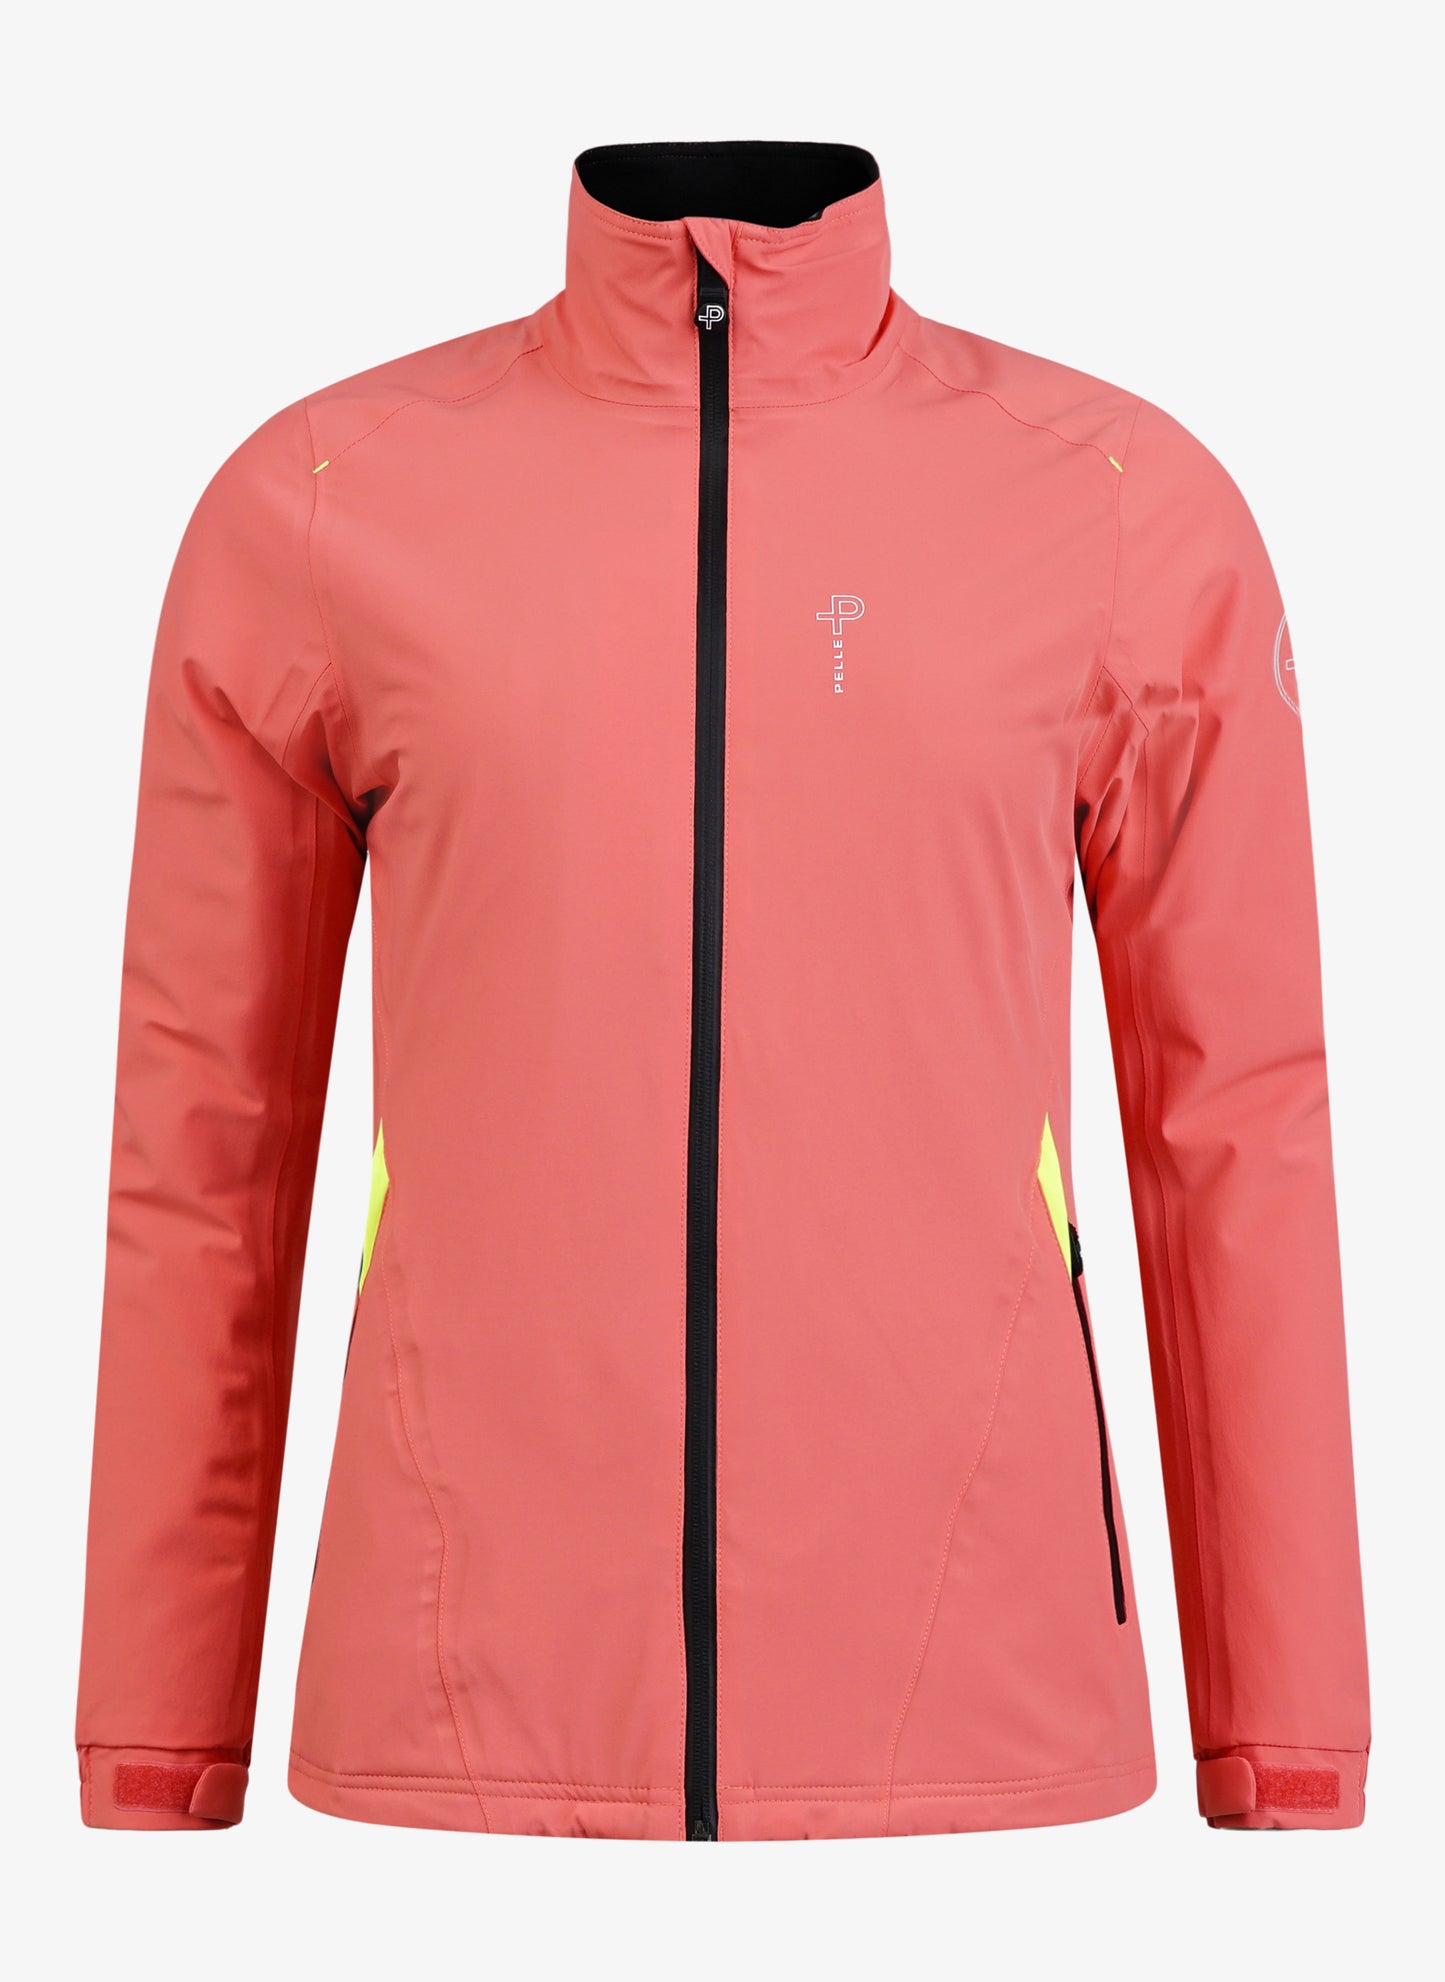 Pelle P Women's Crew Jacket - Coral Red